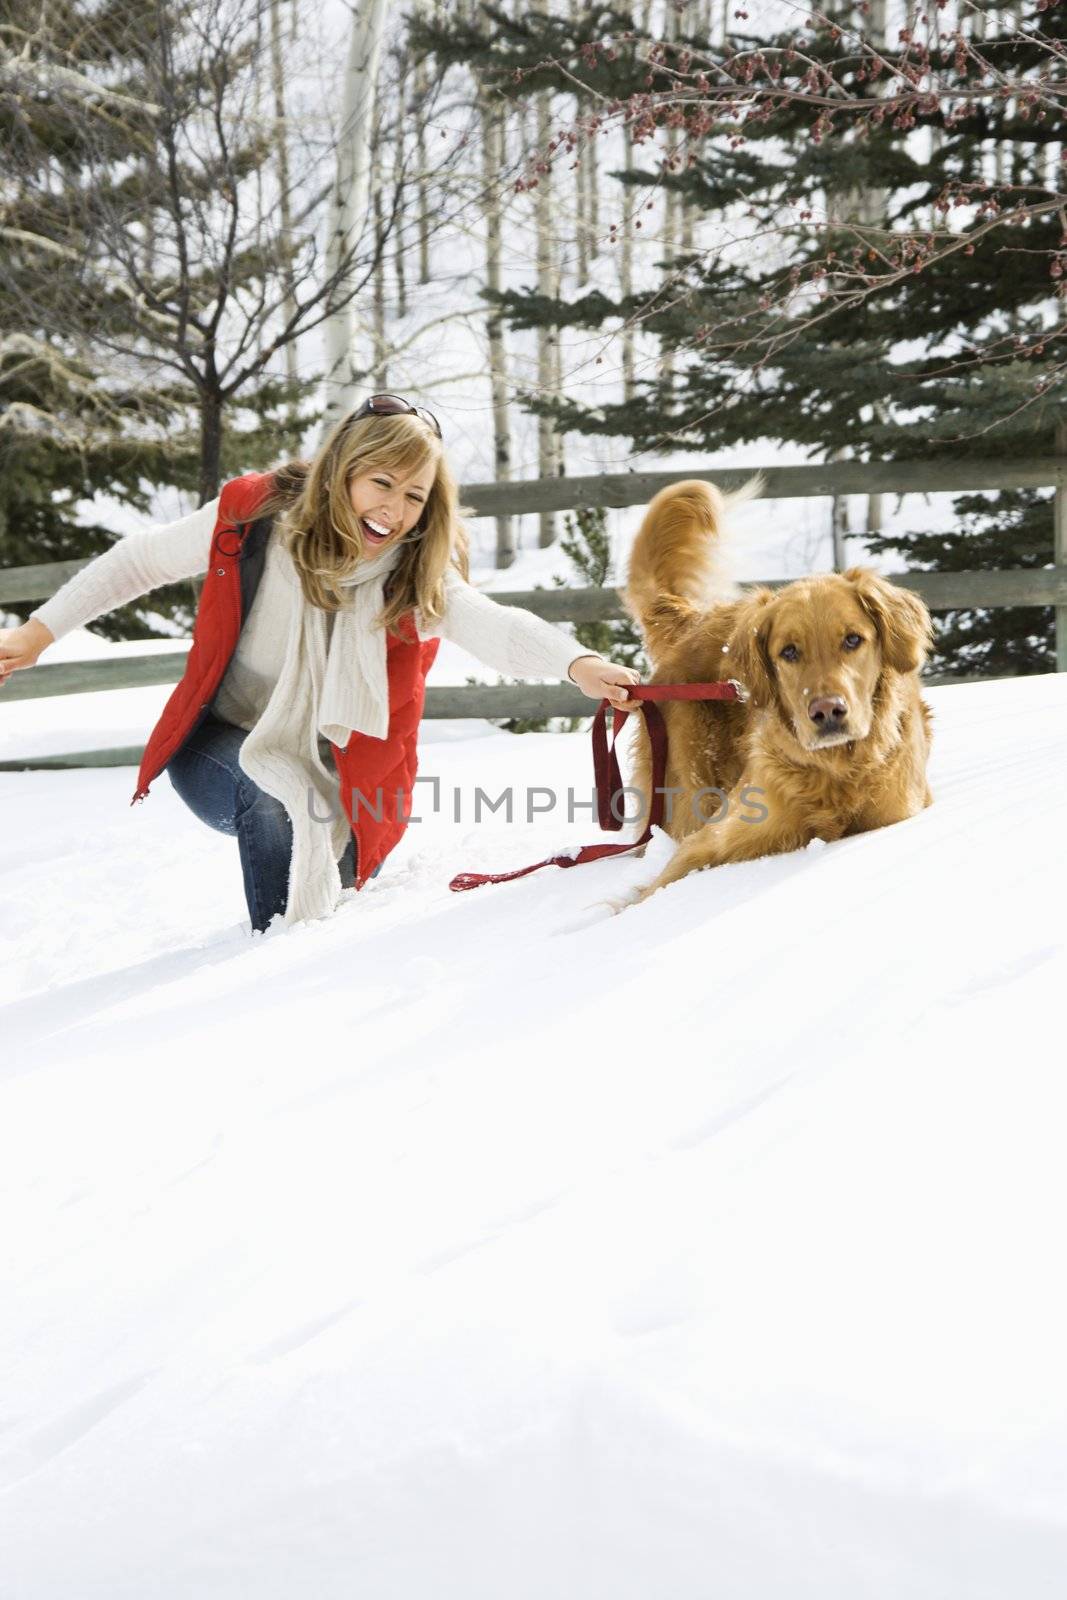 Attractive smiling mid adult Caucasian blond woman being pulled through the snow by a Golden Retriever.